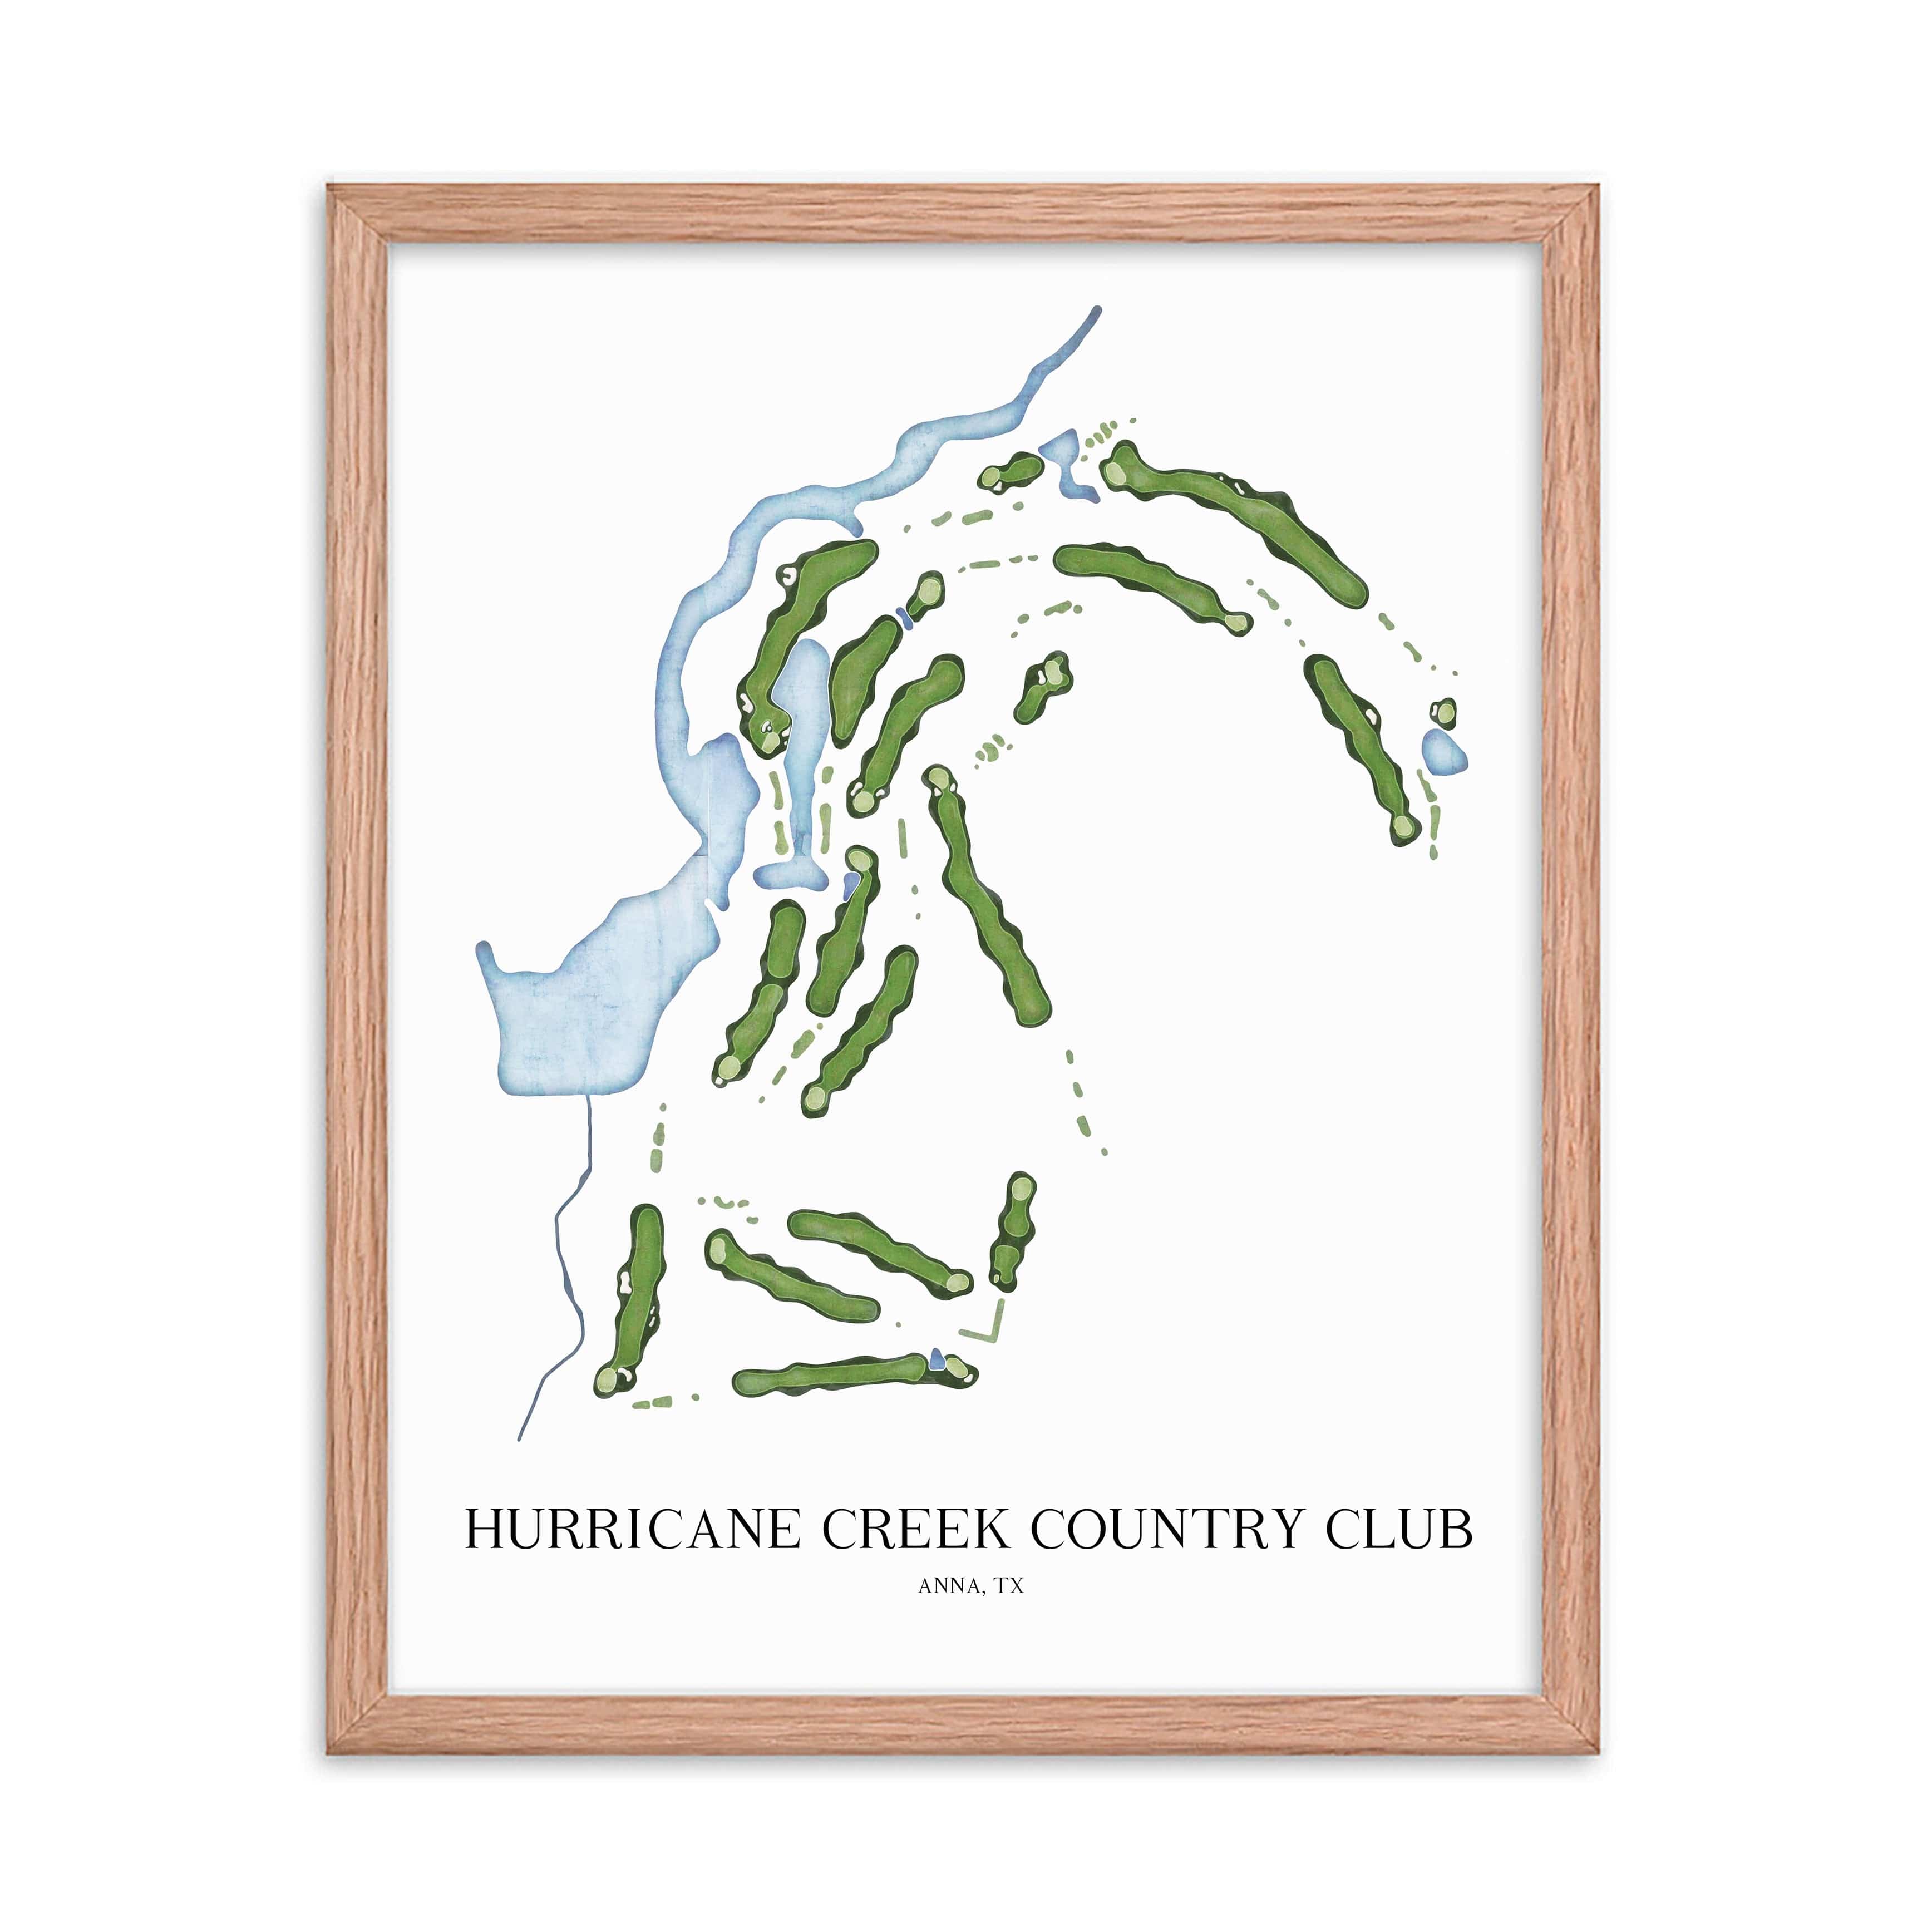 The 19th Hole Golf Shop - Golf Course Prints -  Hurricane Creek Country Club Golf Course Map